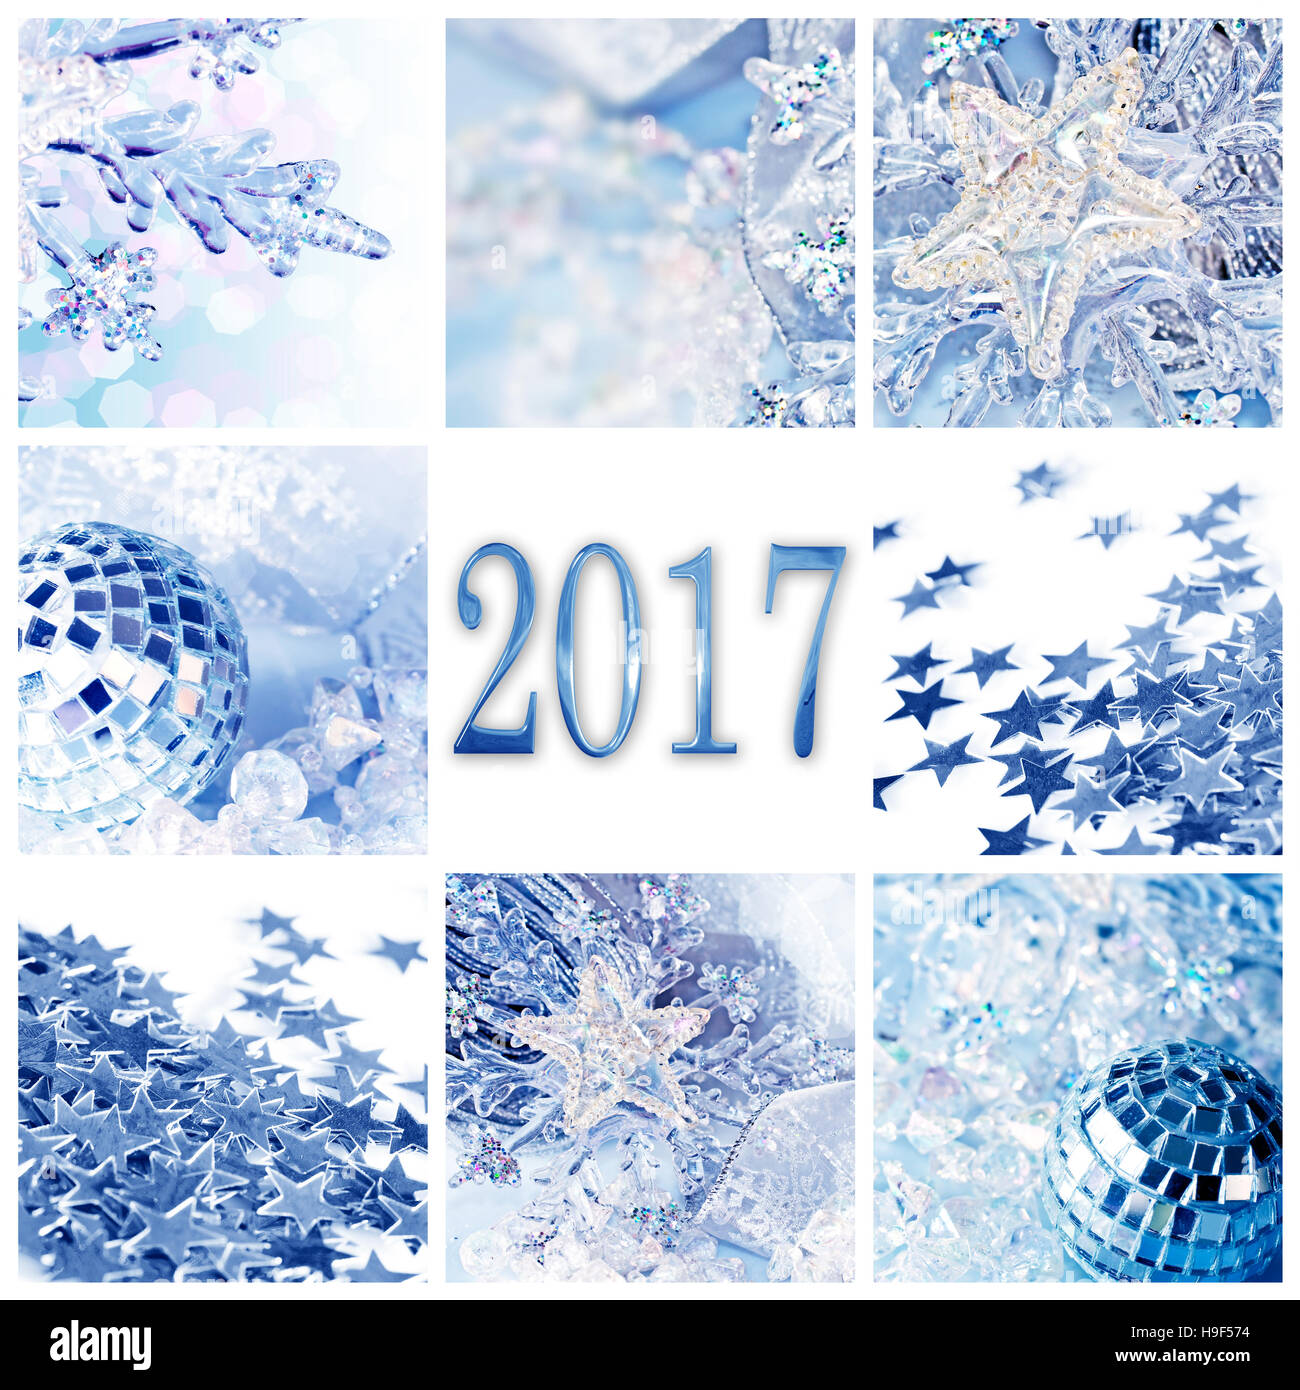 2017, blue christmas ornaments collage square greeting card Stock Photo